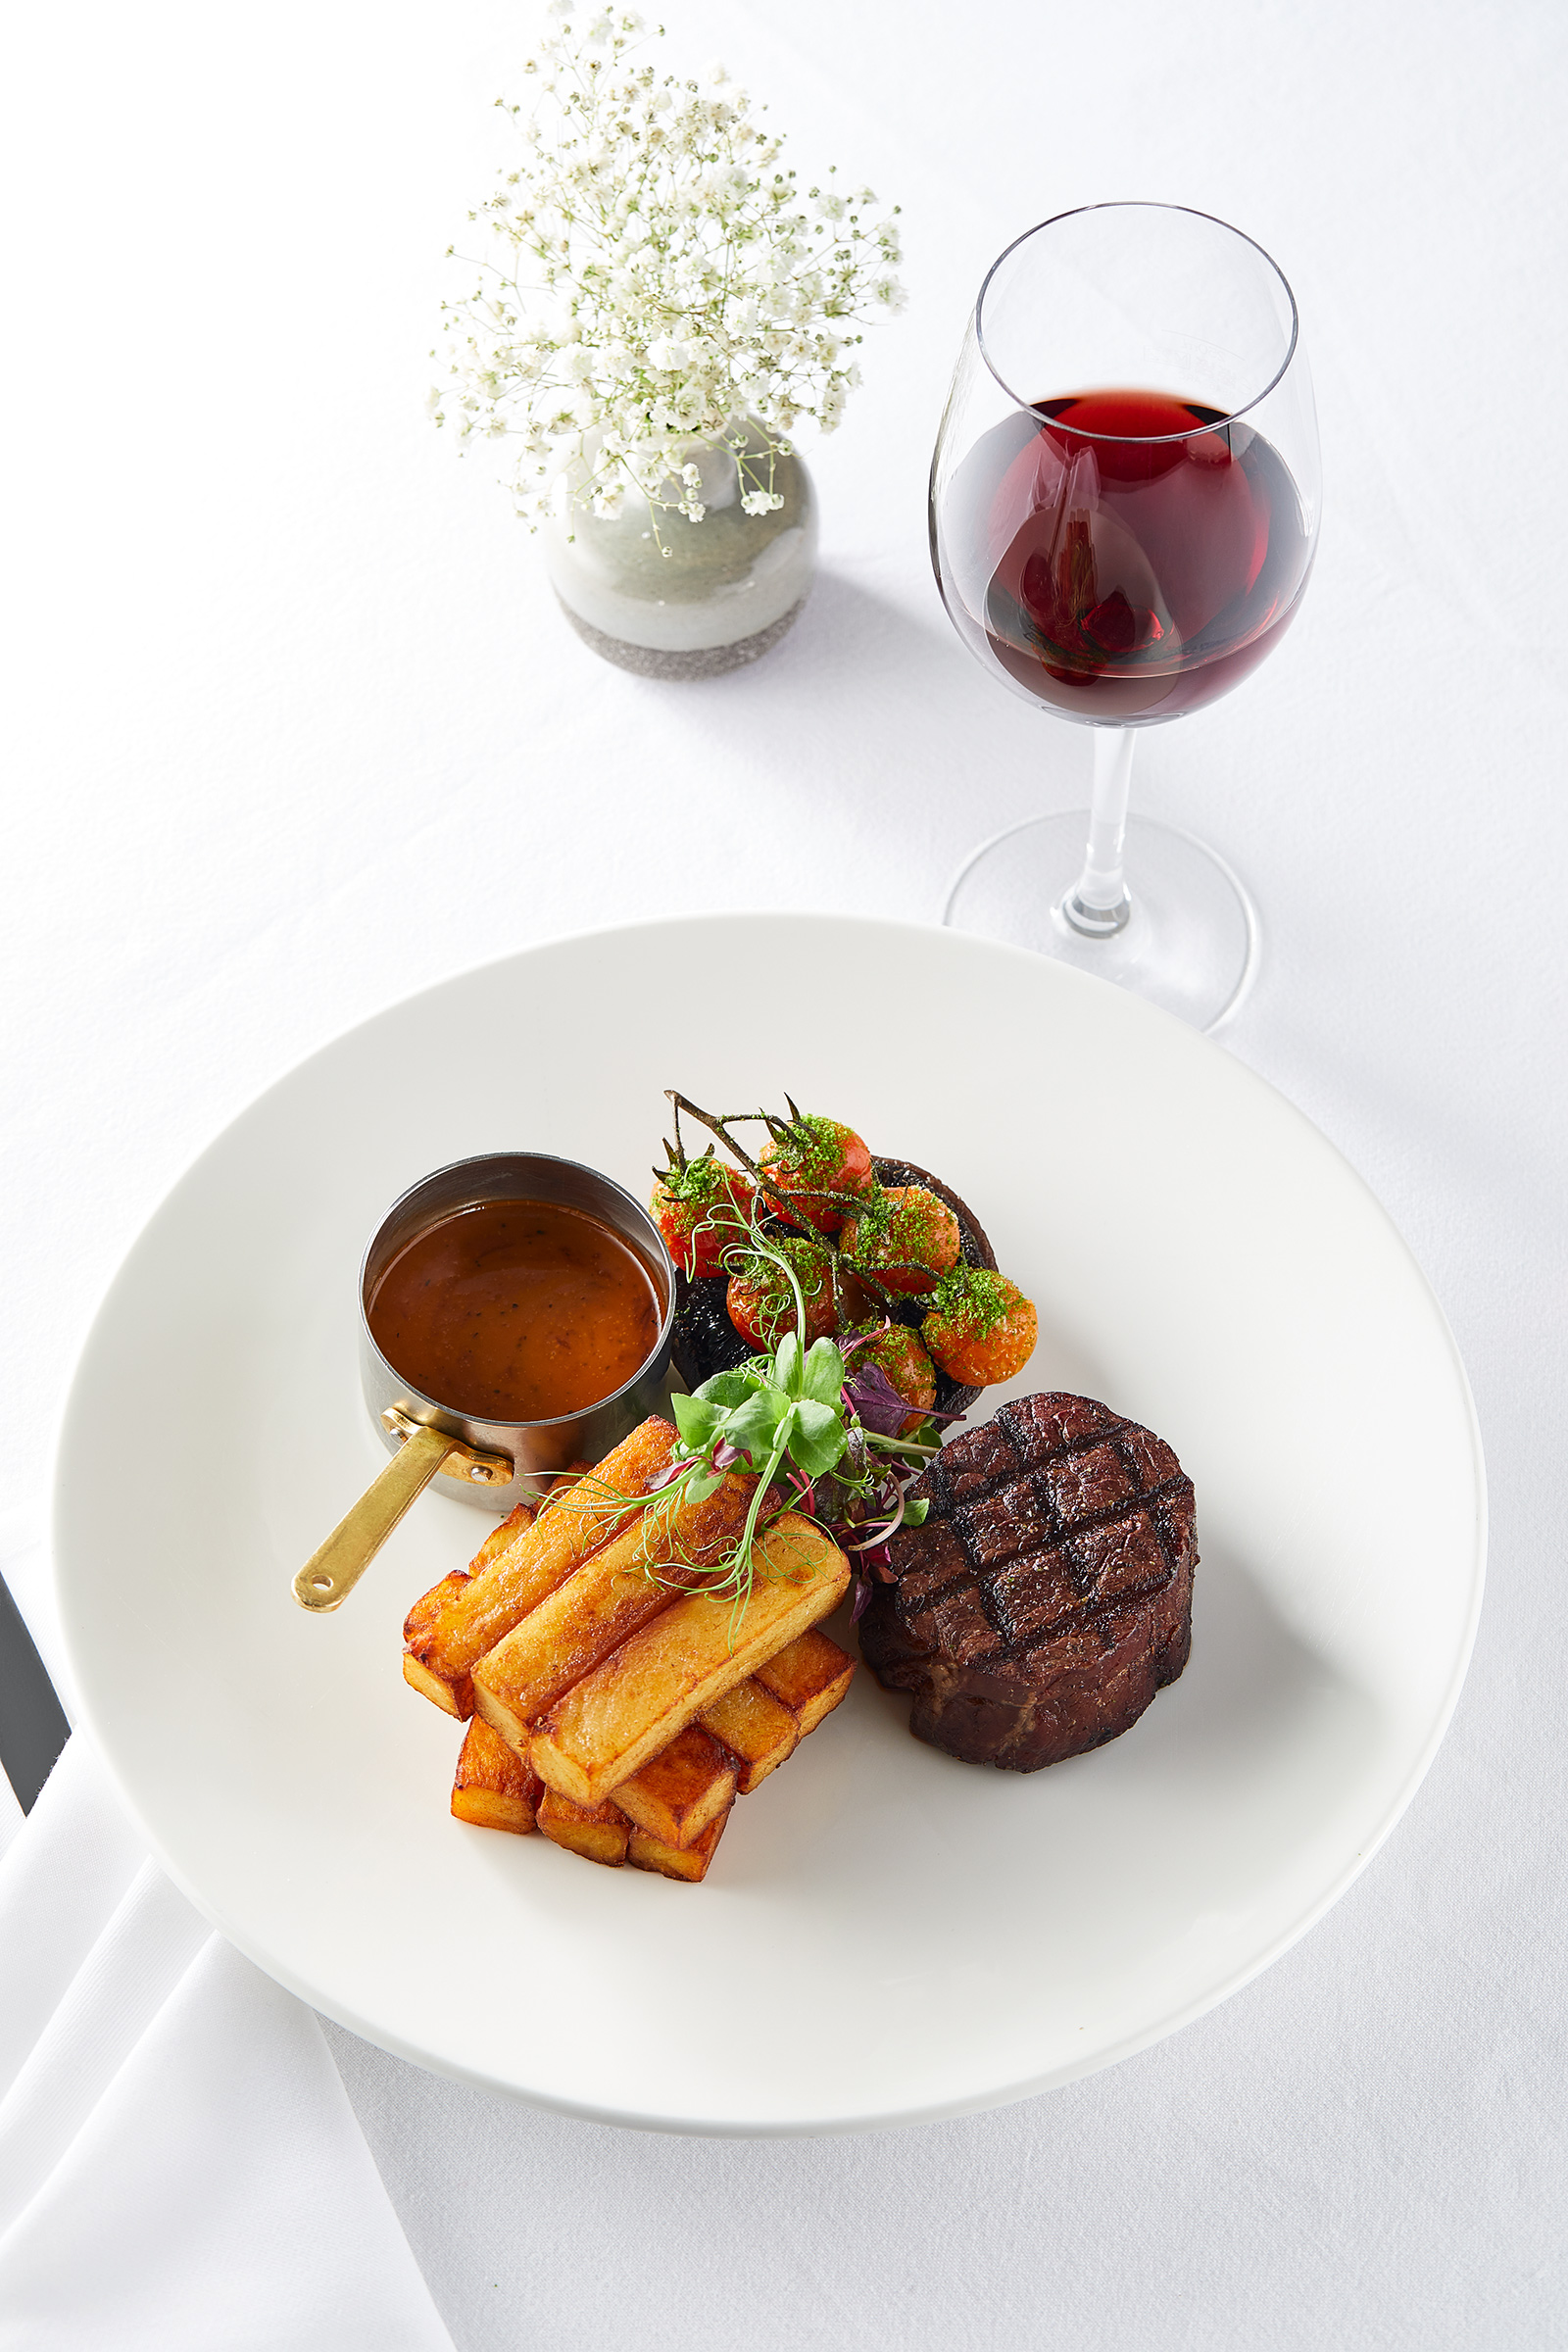 Fillet Steak and Peppercorn Sauce, Professional food and drink photographer Alastair Ferrier